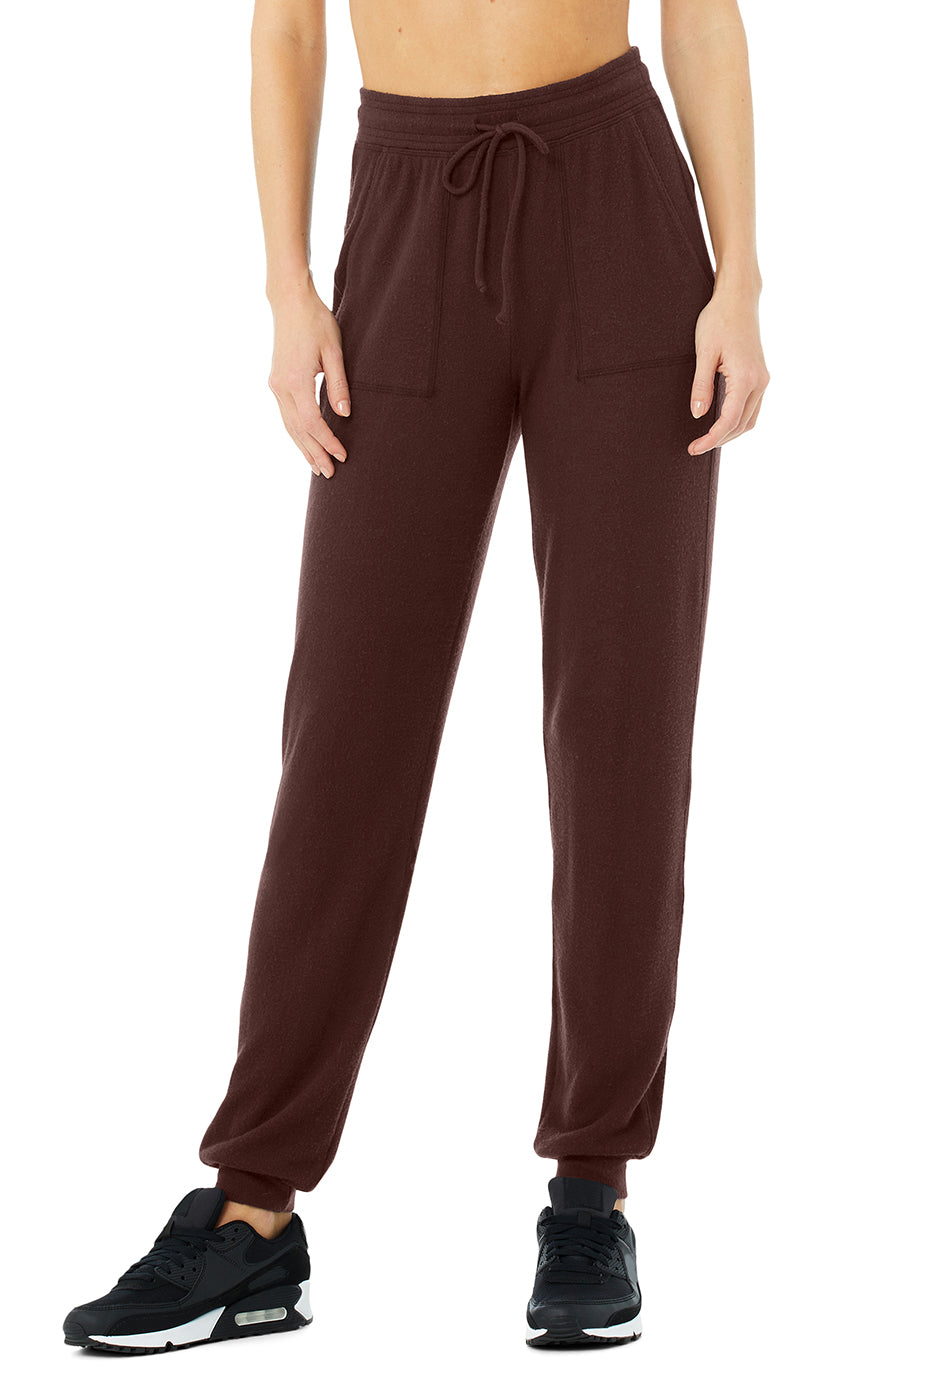 Soho Sweatpant in Cherry Cola by Alo Yoga